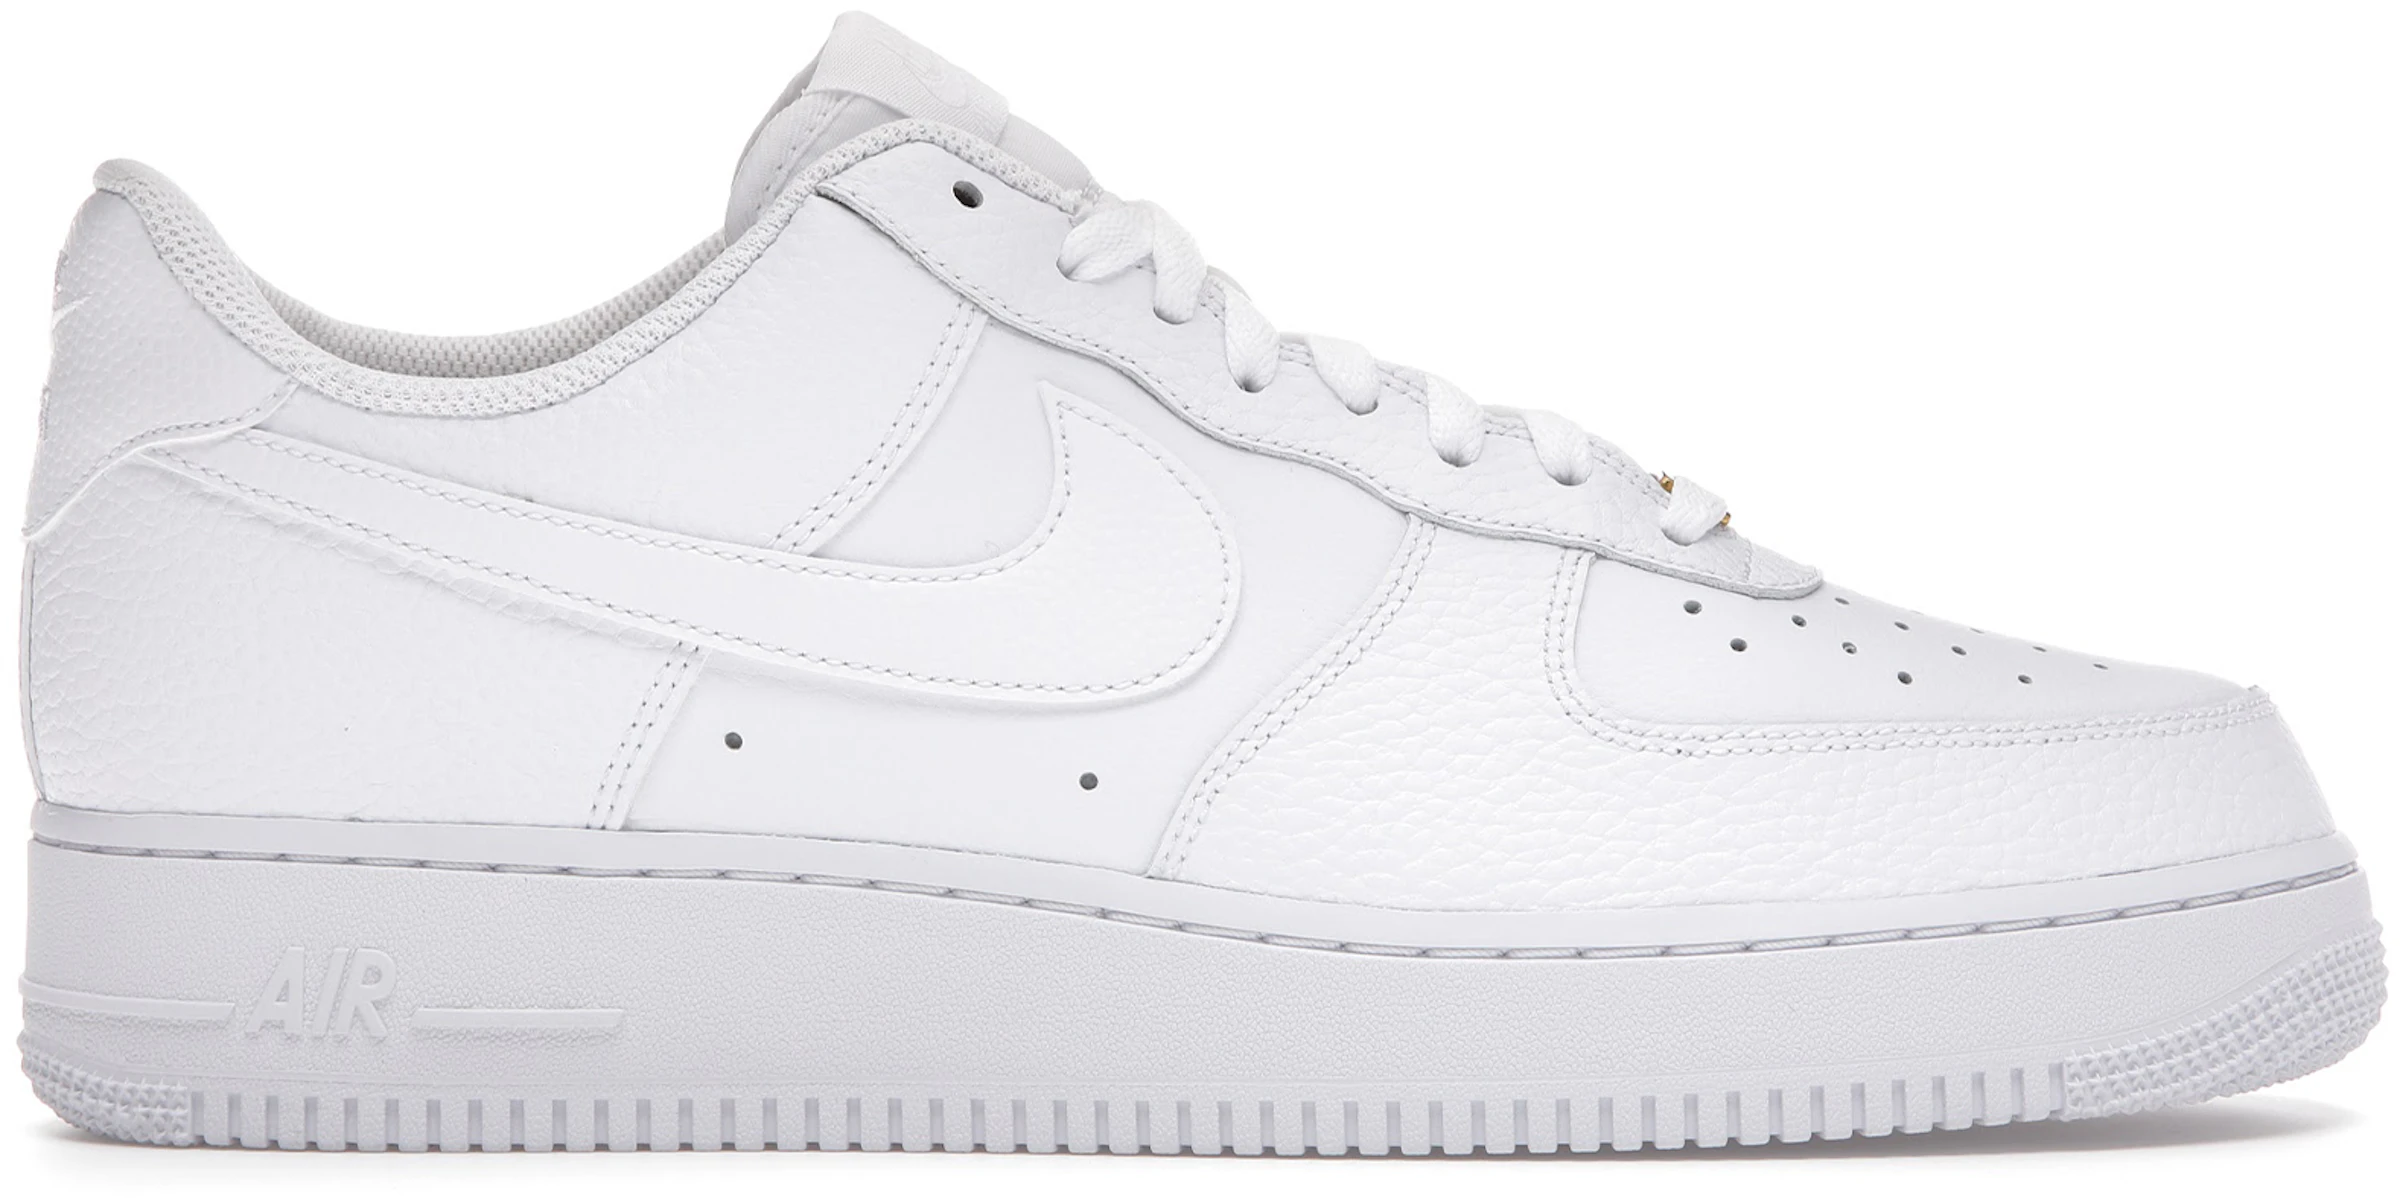 Nike Force 1 Low Triple White Tumbled Leather - CZ0326-101 - ES